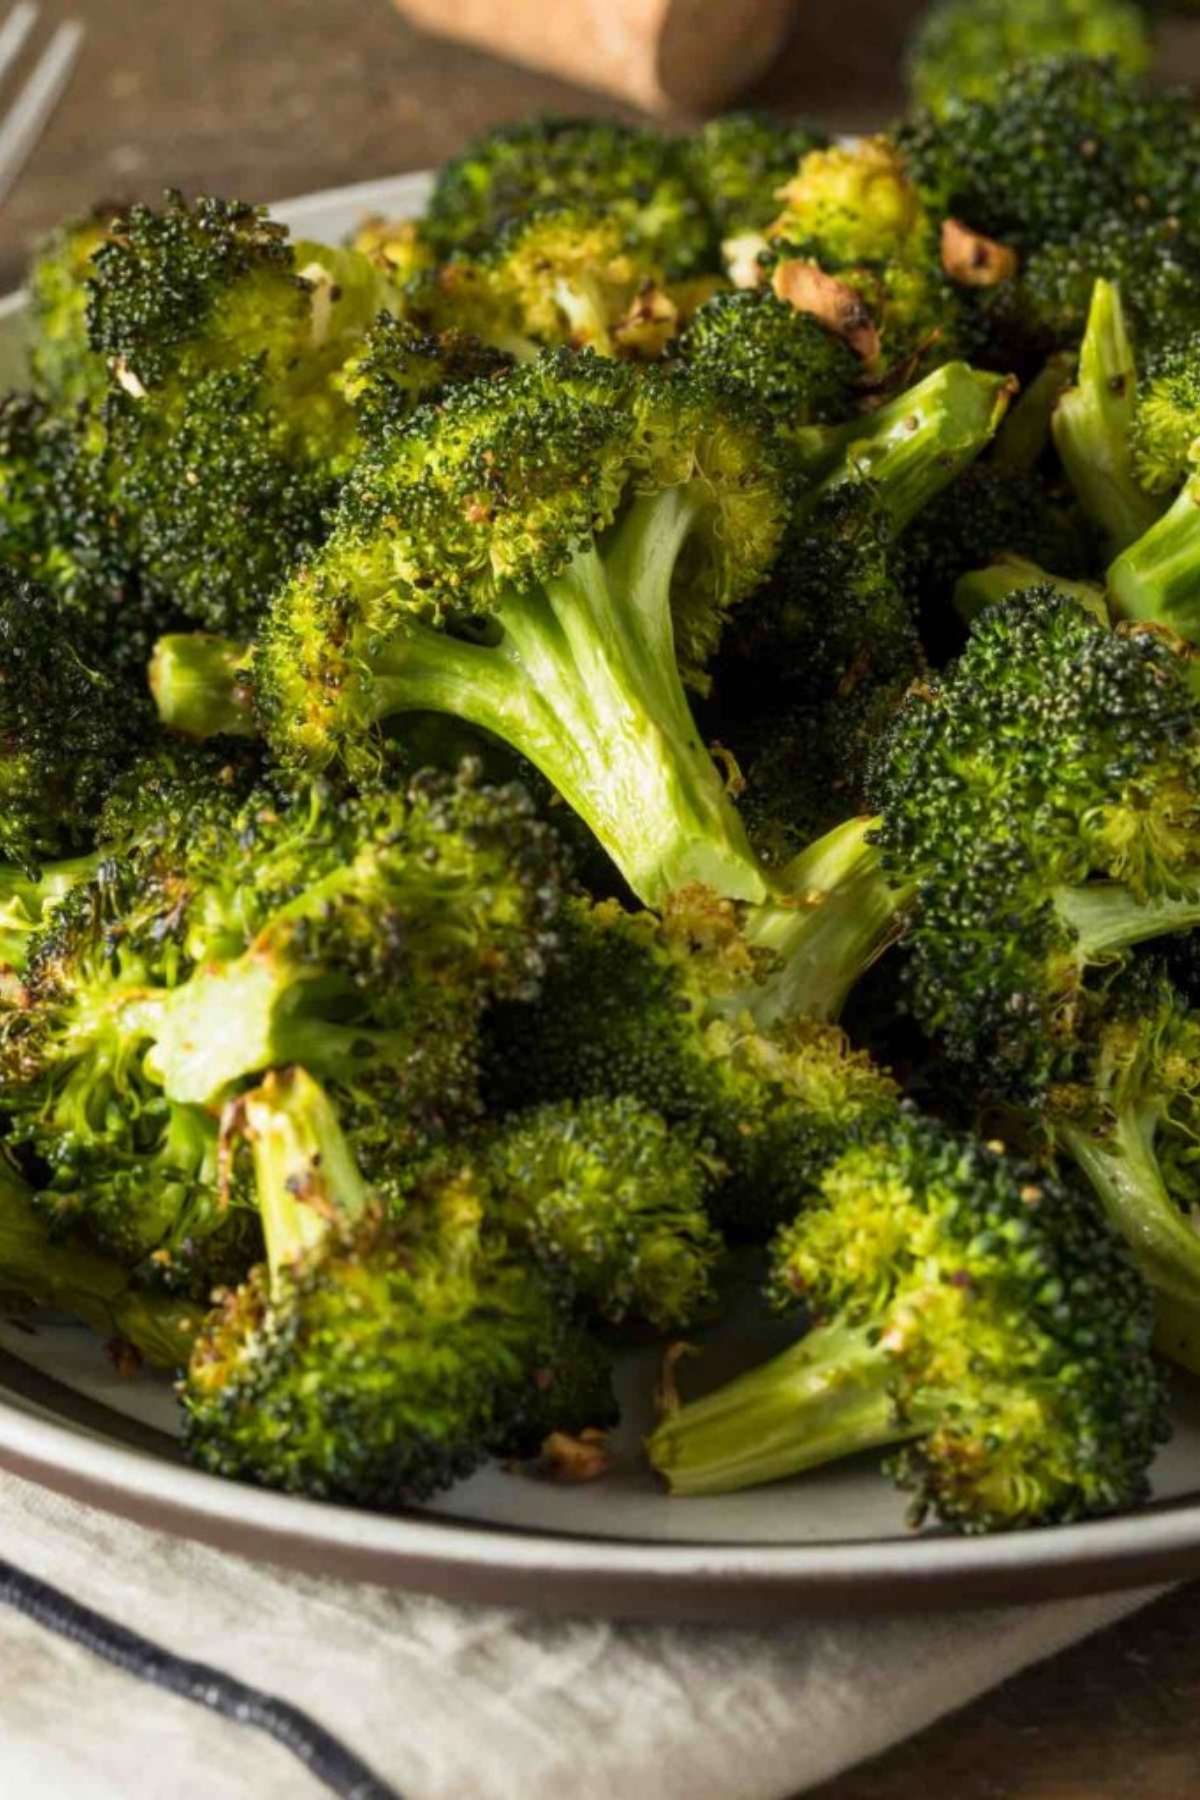 Broccoli is one of the most versatile vegetables to eat. You can enjoy it raw with dips, pureed in creamy soups, tossed into stir frys, featured in salads, and much more! The secret to great tasting broccoli that’s tender and crisp is to avoid overcooking it. We’ve gathered 22 of the Best Broccoli Recipes for you to try. We think you’ll love them!